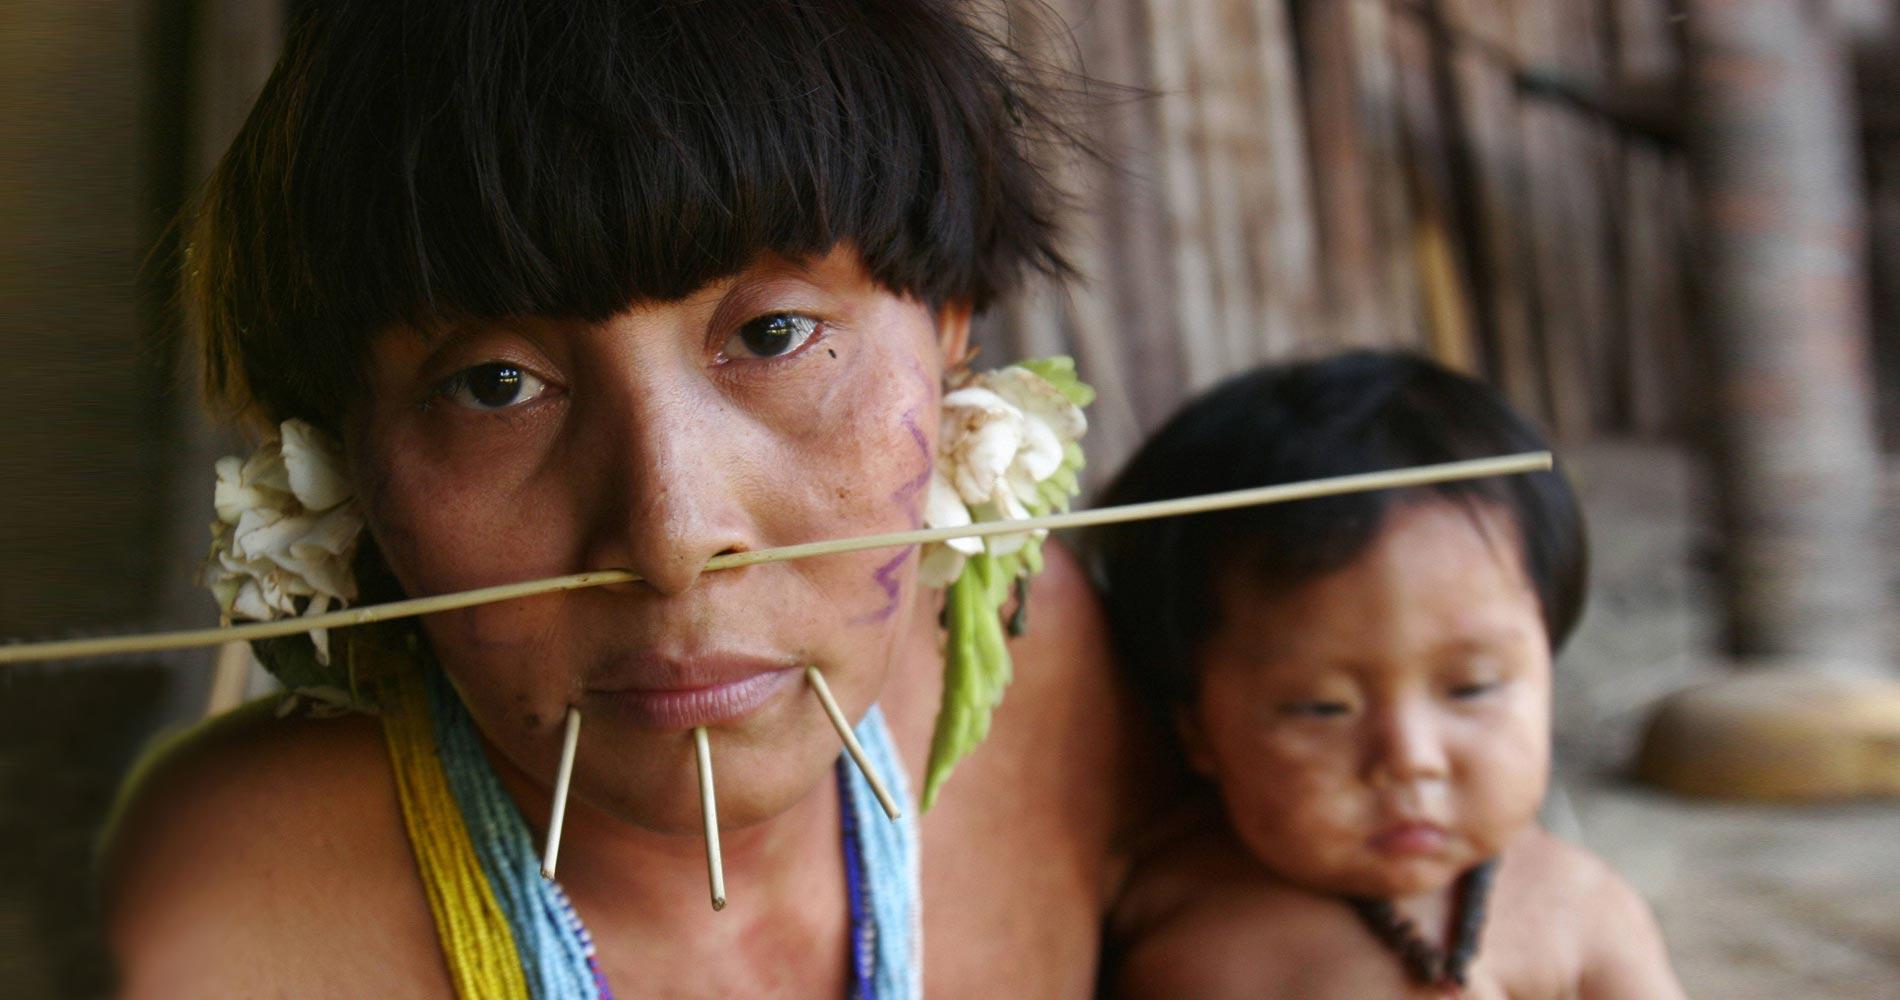 The Amazon Gold Rush Catastrophe Endangers the Survival of Indigenous Yanomami